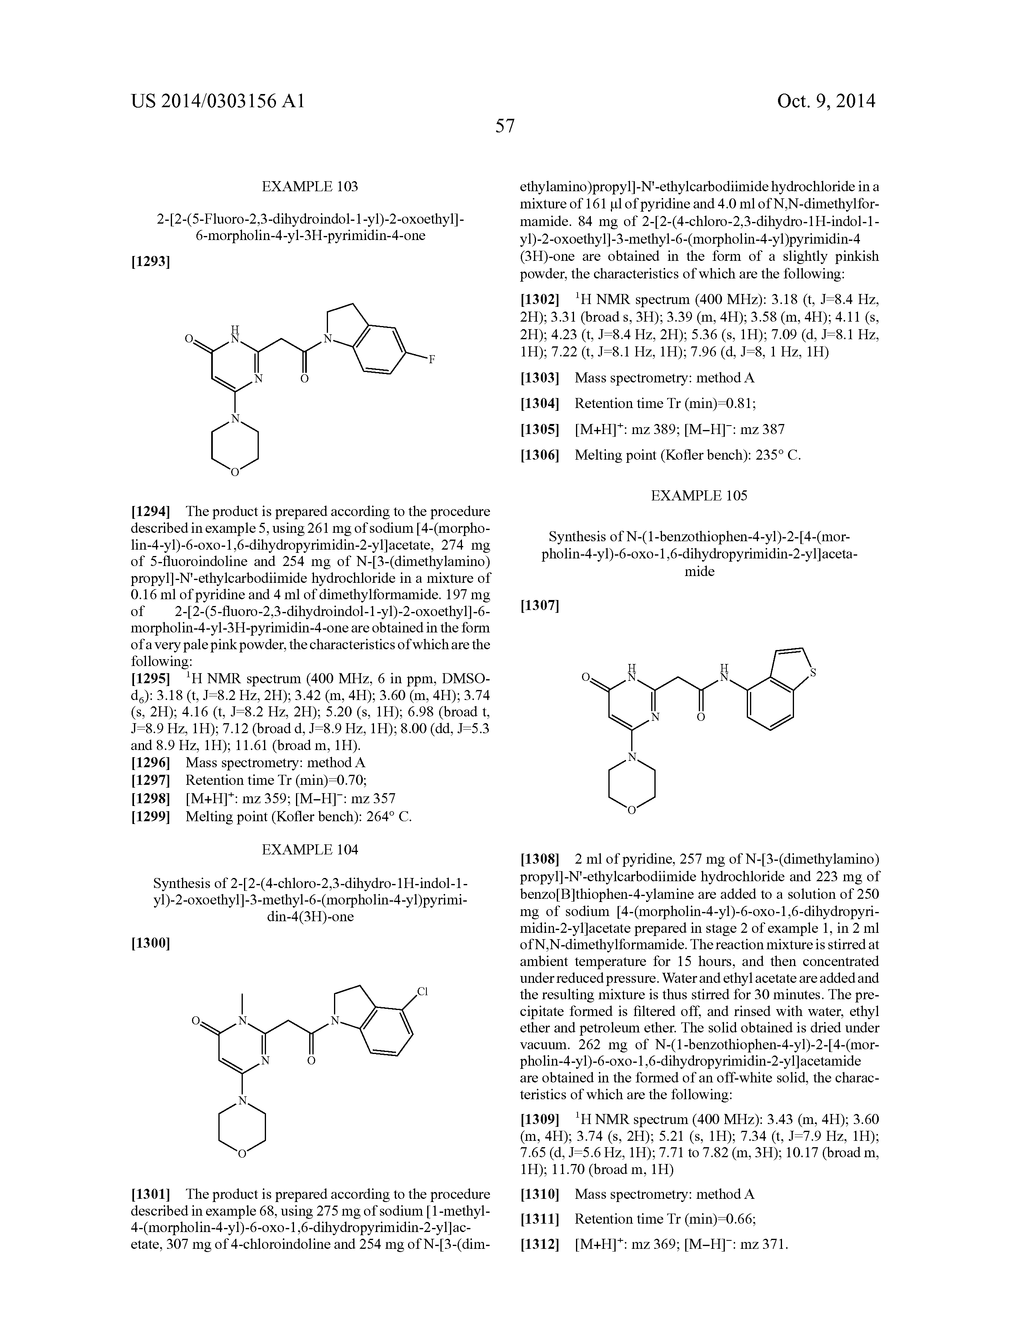 NOVEL (6-OXO-1,6-DIHYDROPYRIMIDIN-2-YL)AMIDE DERIVATIVES, PREPARATION     THEREOF AND PHARMACEUTICAL USE THEREOF AS AKT(PKB) PHOSPHORYLATION     INHIBITORS - diagram, schematic, and image 58